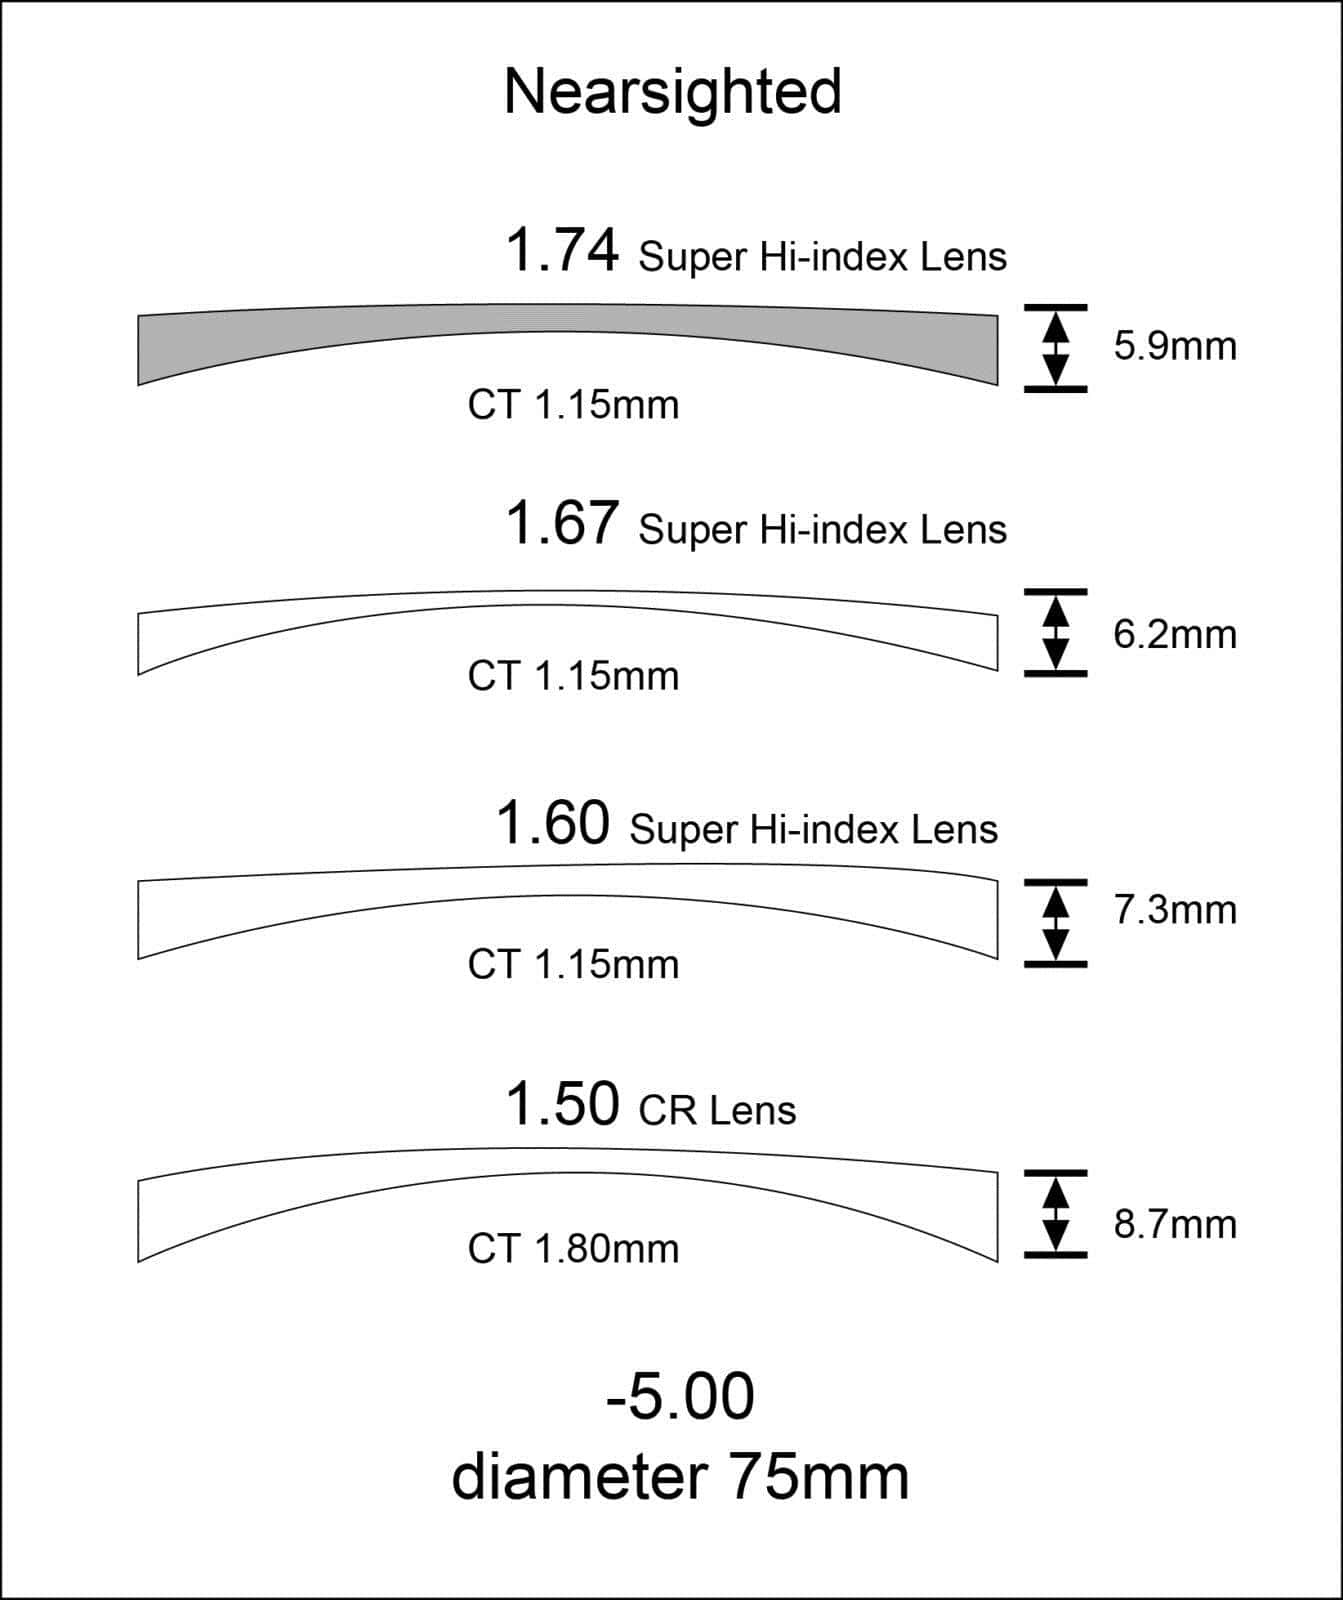 thickness of lenses